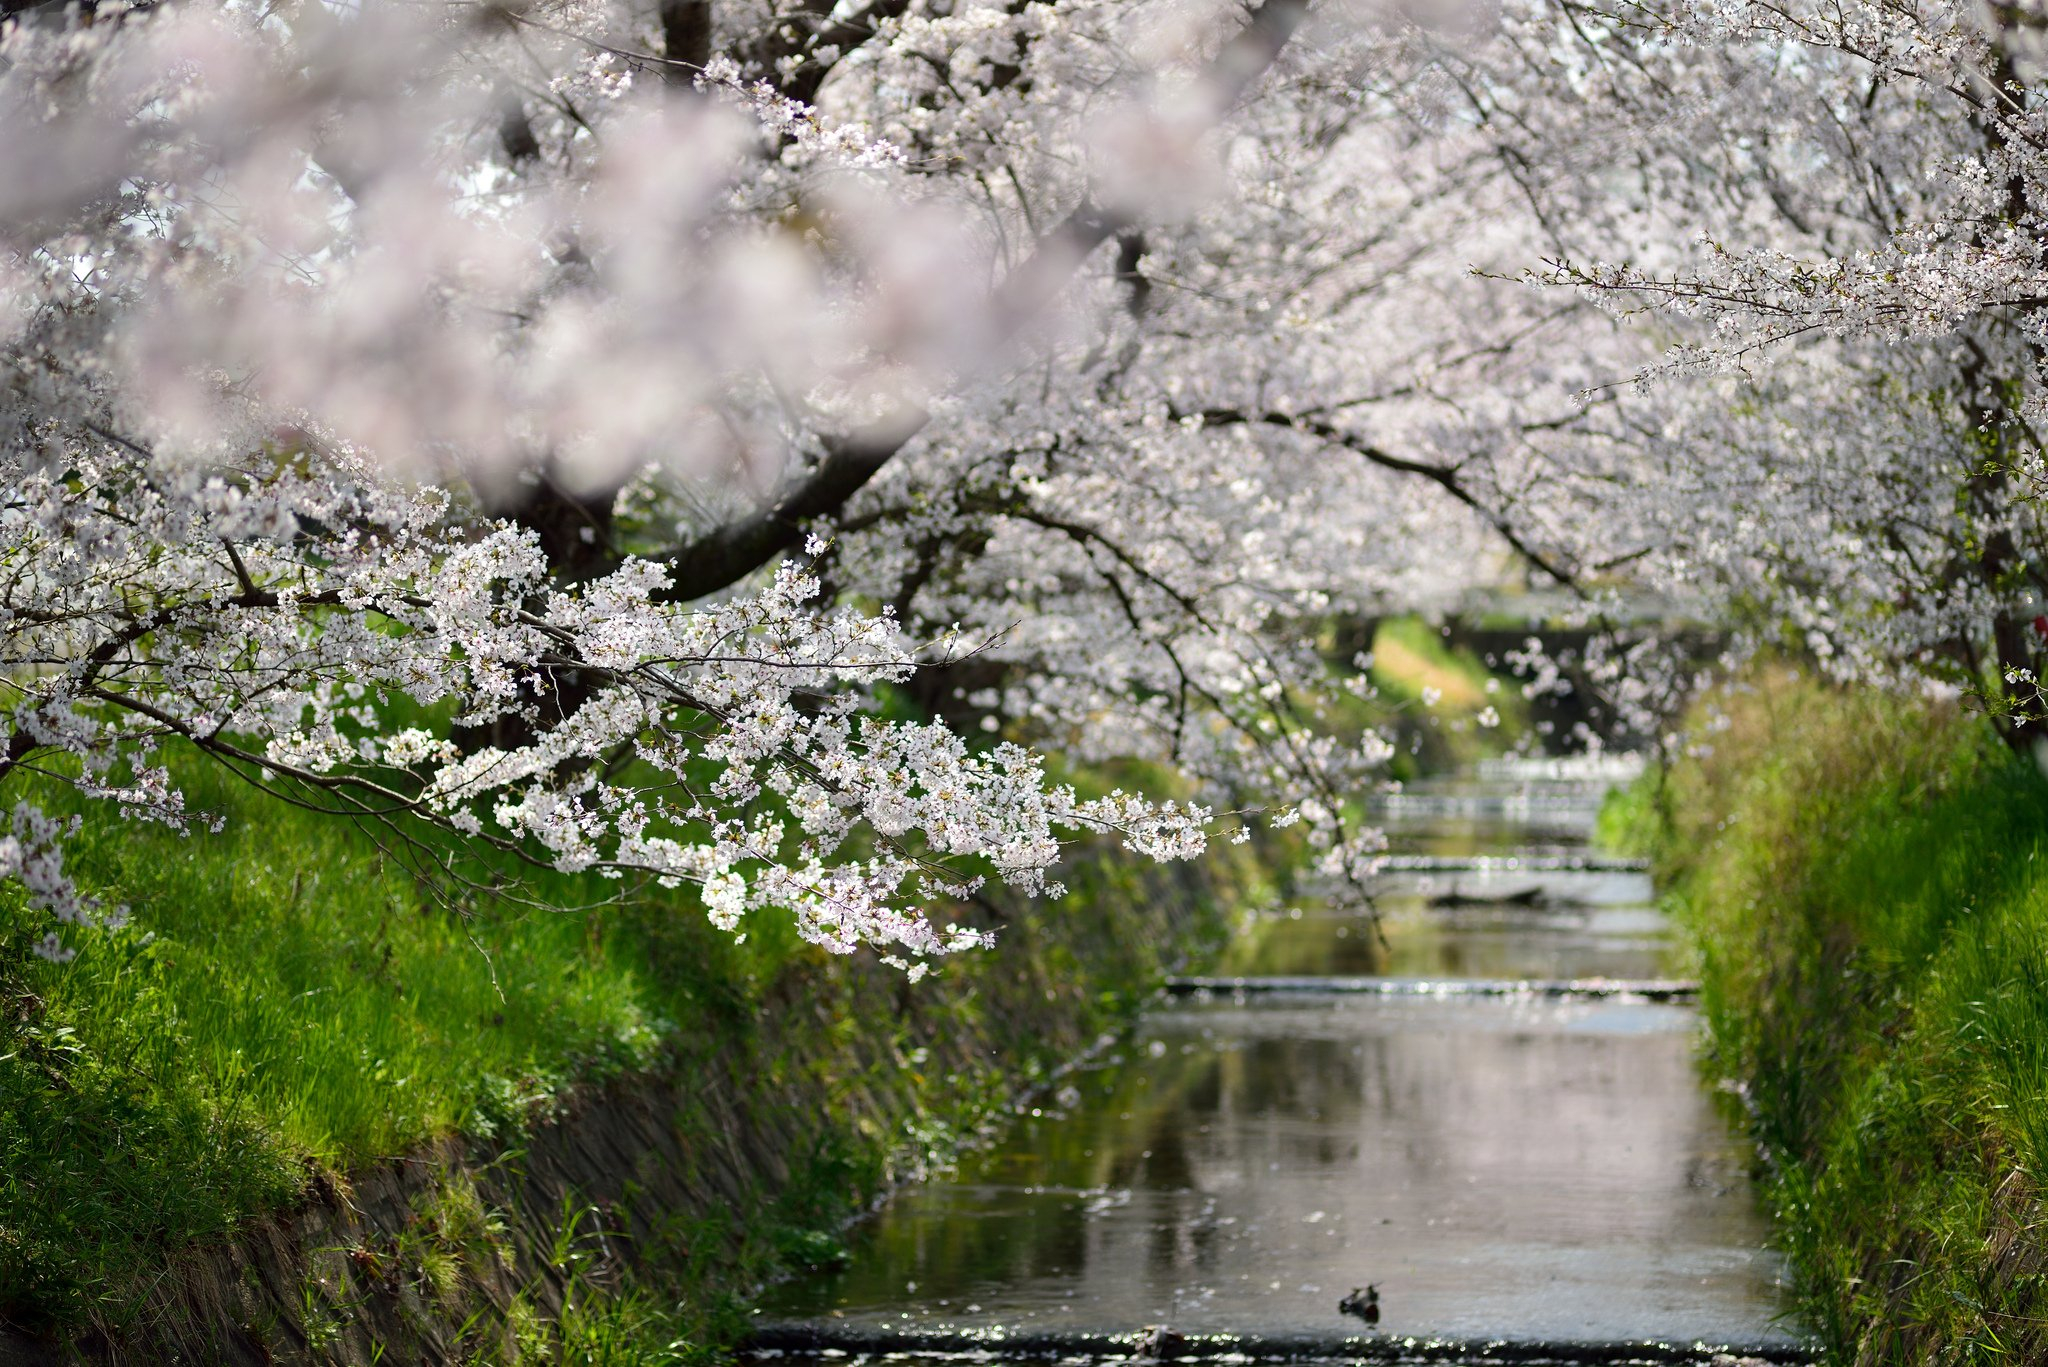 2048x1367 beautiful, Beauty, Blossoms, Walks, Canal, Canals, Treescherry, Blossomflowers, Green, Hd, Hd, Wallpaper, Japan, Leaf, Leaves, Nature, Osaka, Photo, Places, Sakura, Season, Sprin Wallpapers HD / Desktop and Mobile Backgrounds